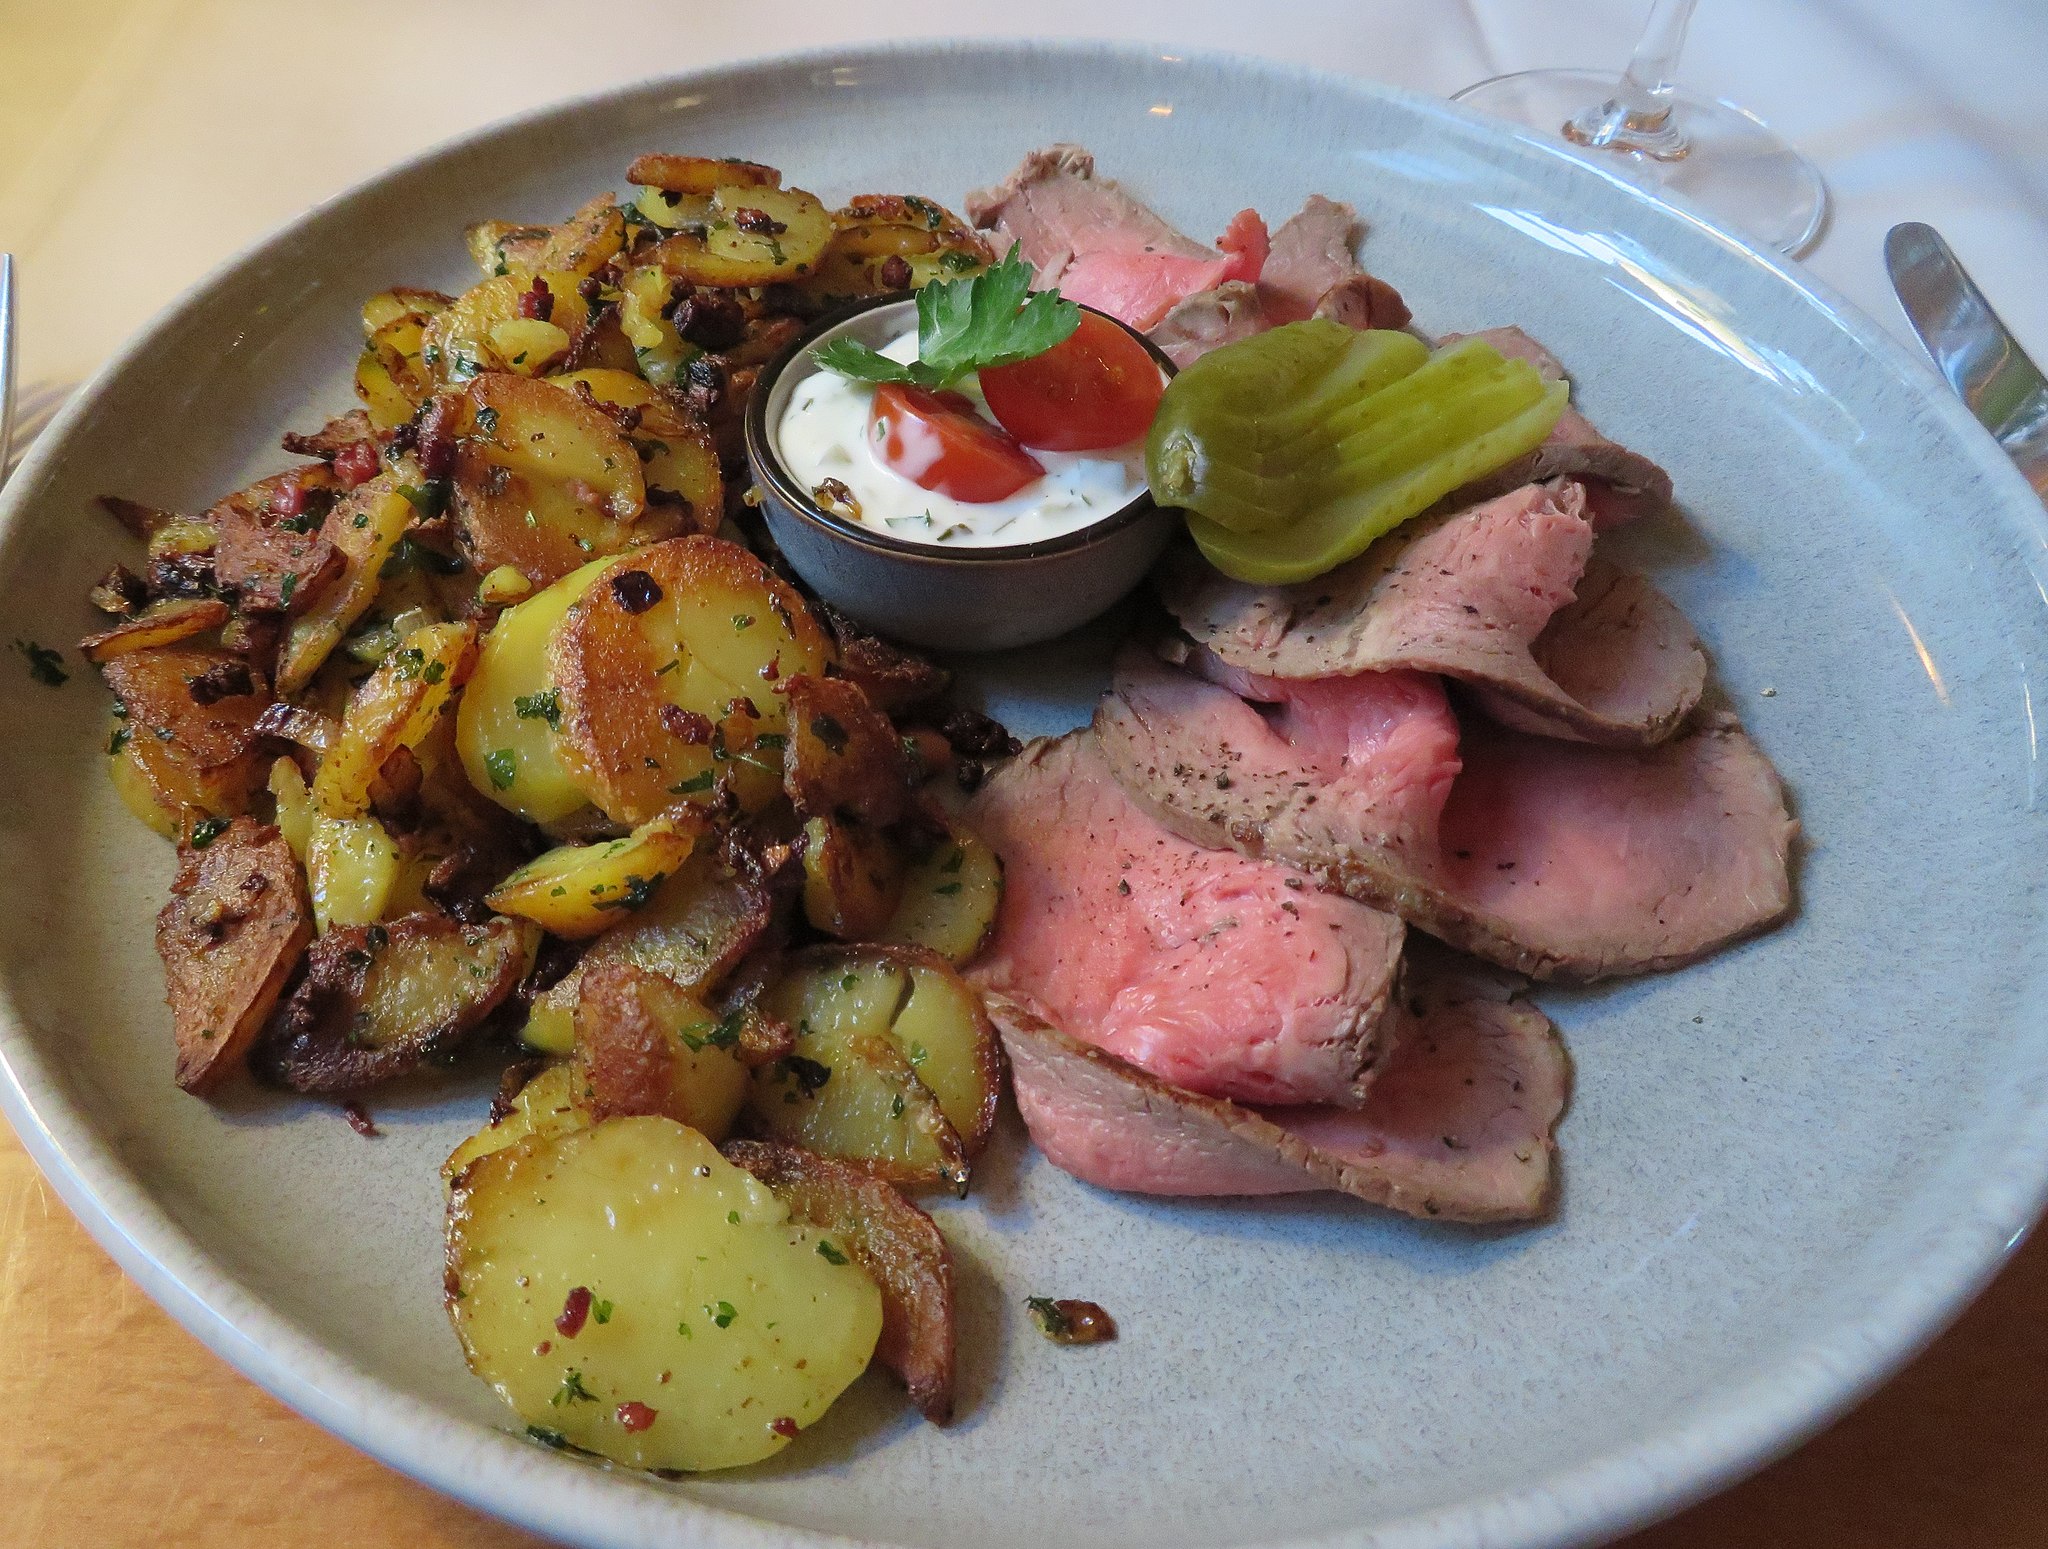 Bratkartoffeln is a common German side dish that's made from potatoes